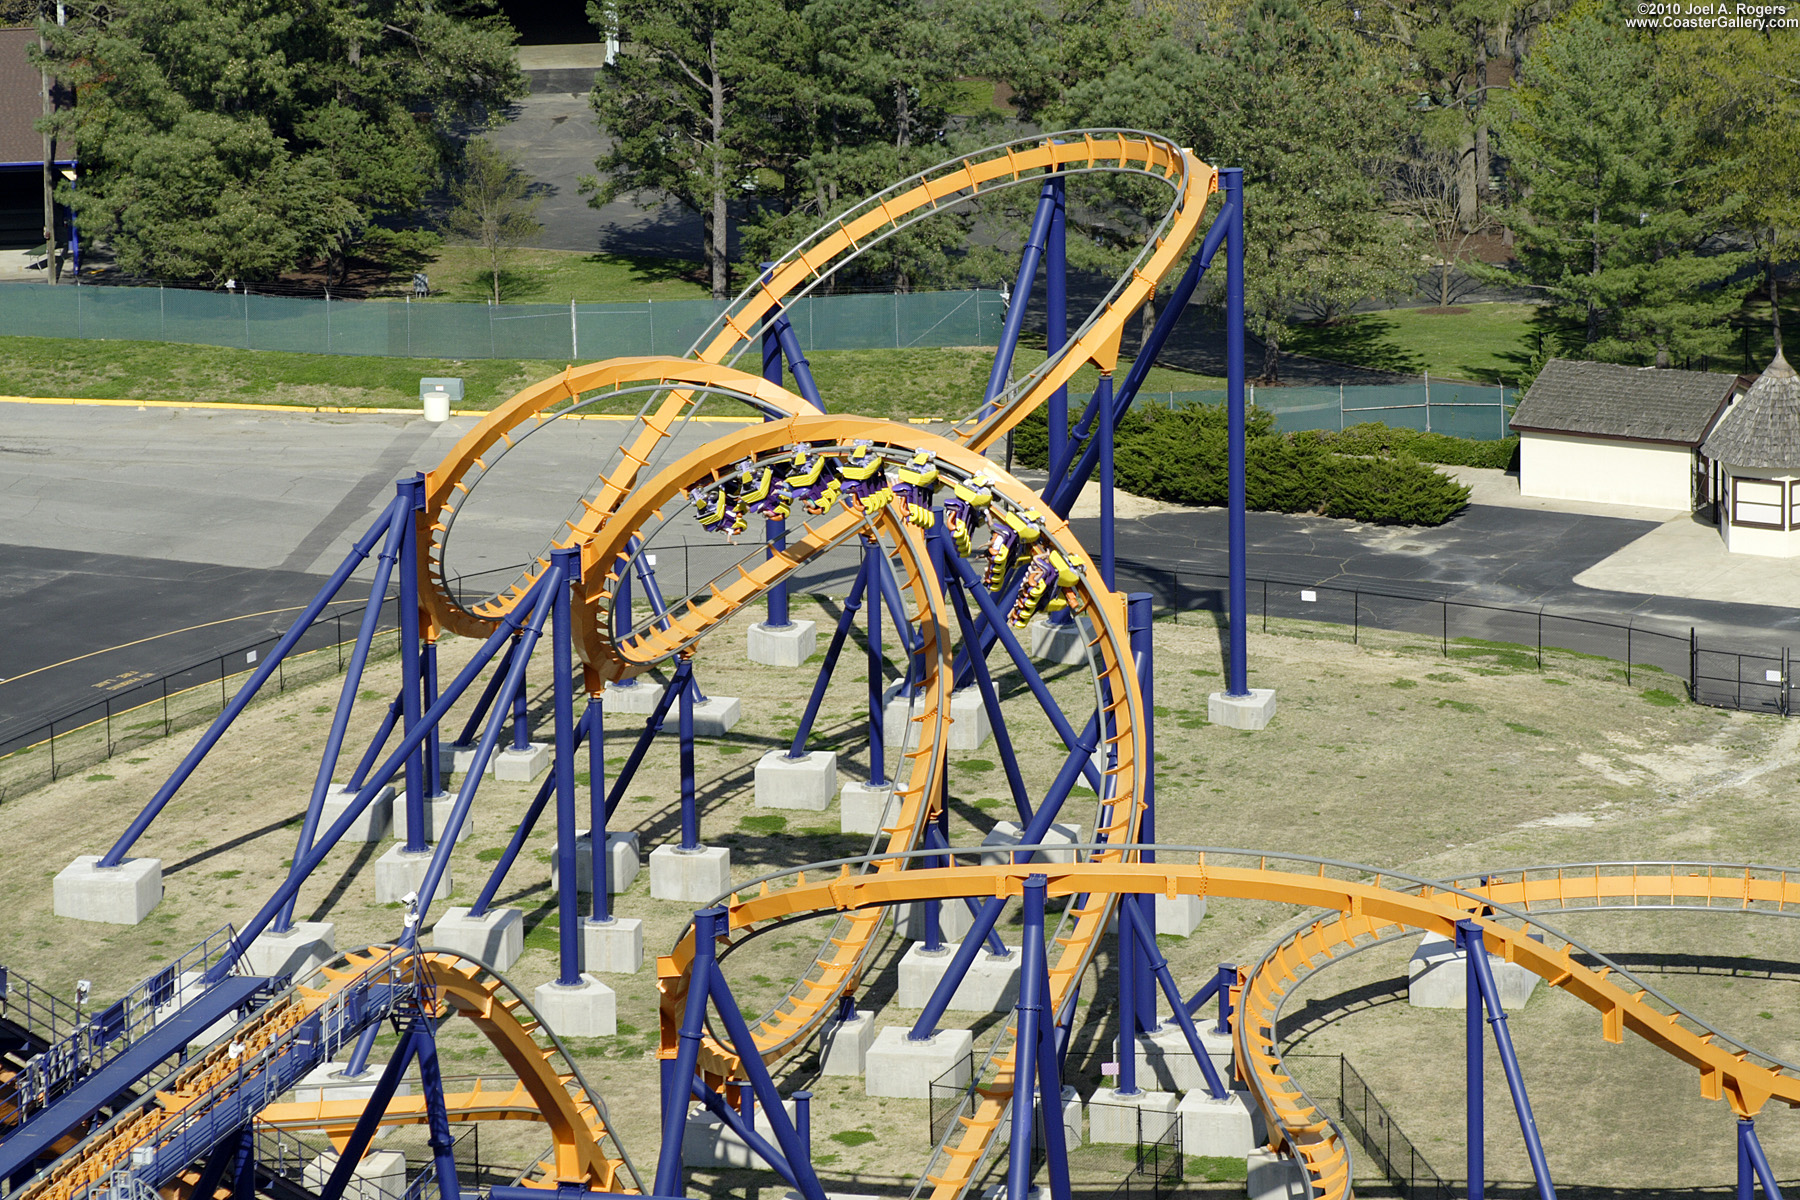 Aerial view of a roller coaster